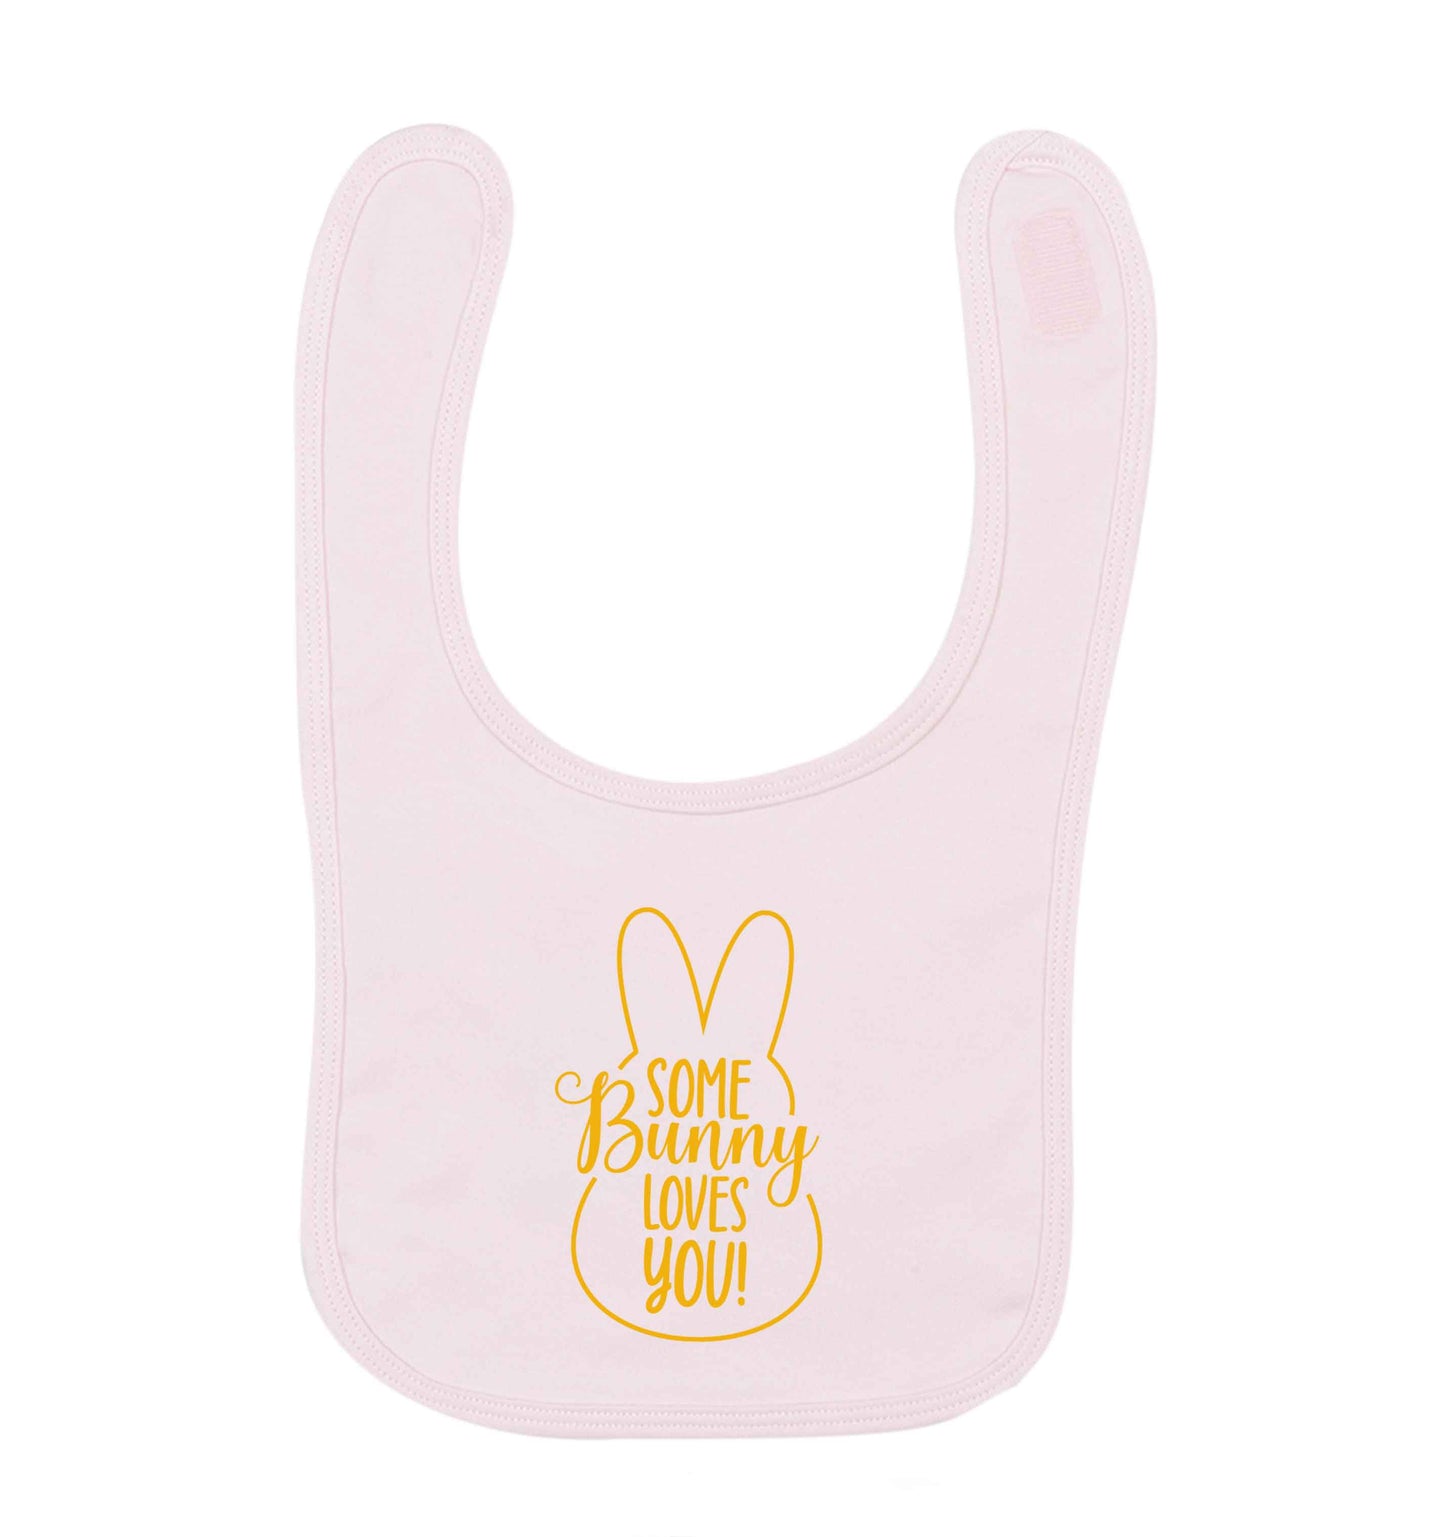 Some bunny loves you pale pink baby bib